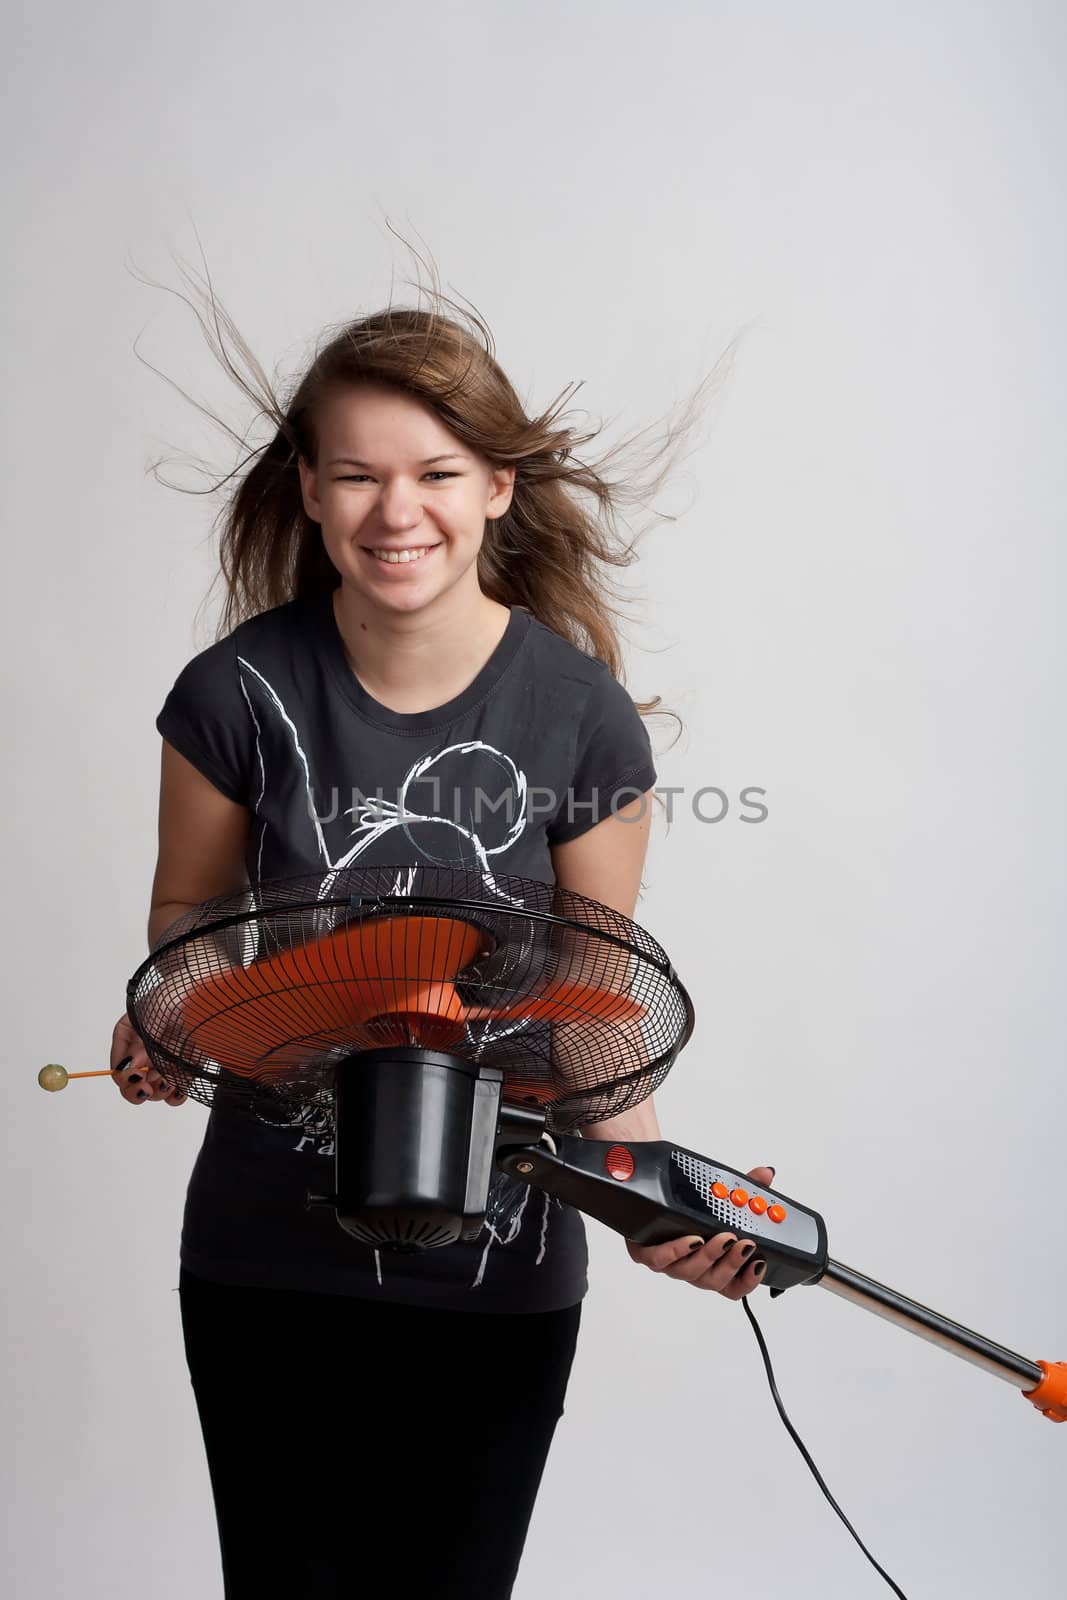 girl with a fan on a light background